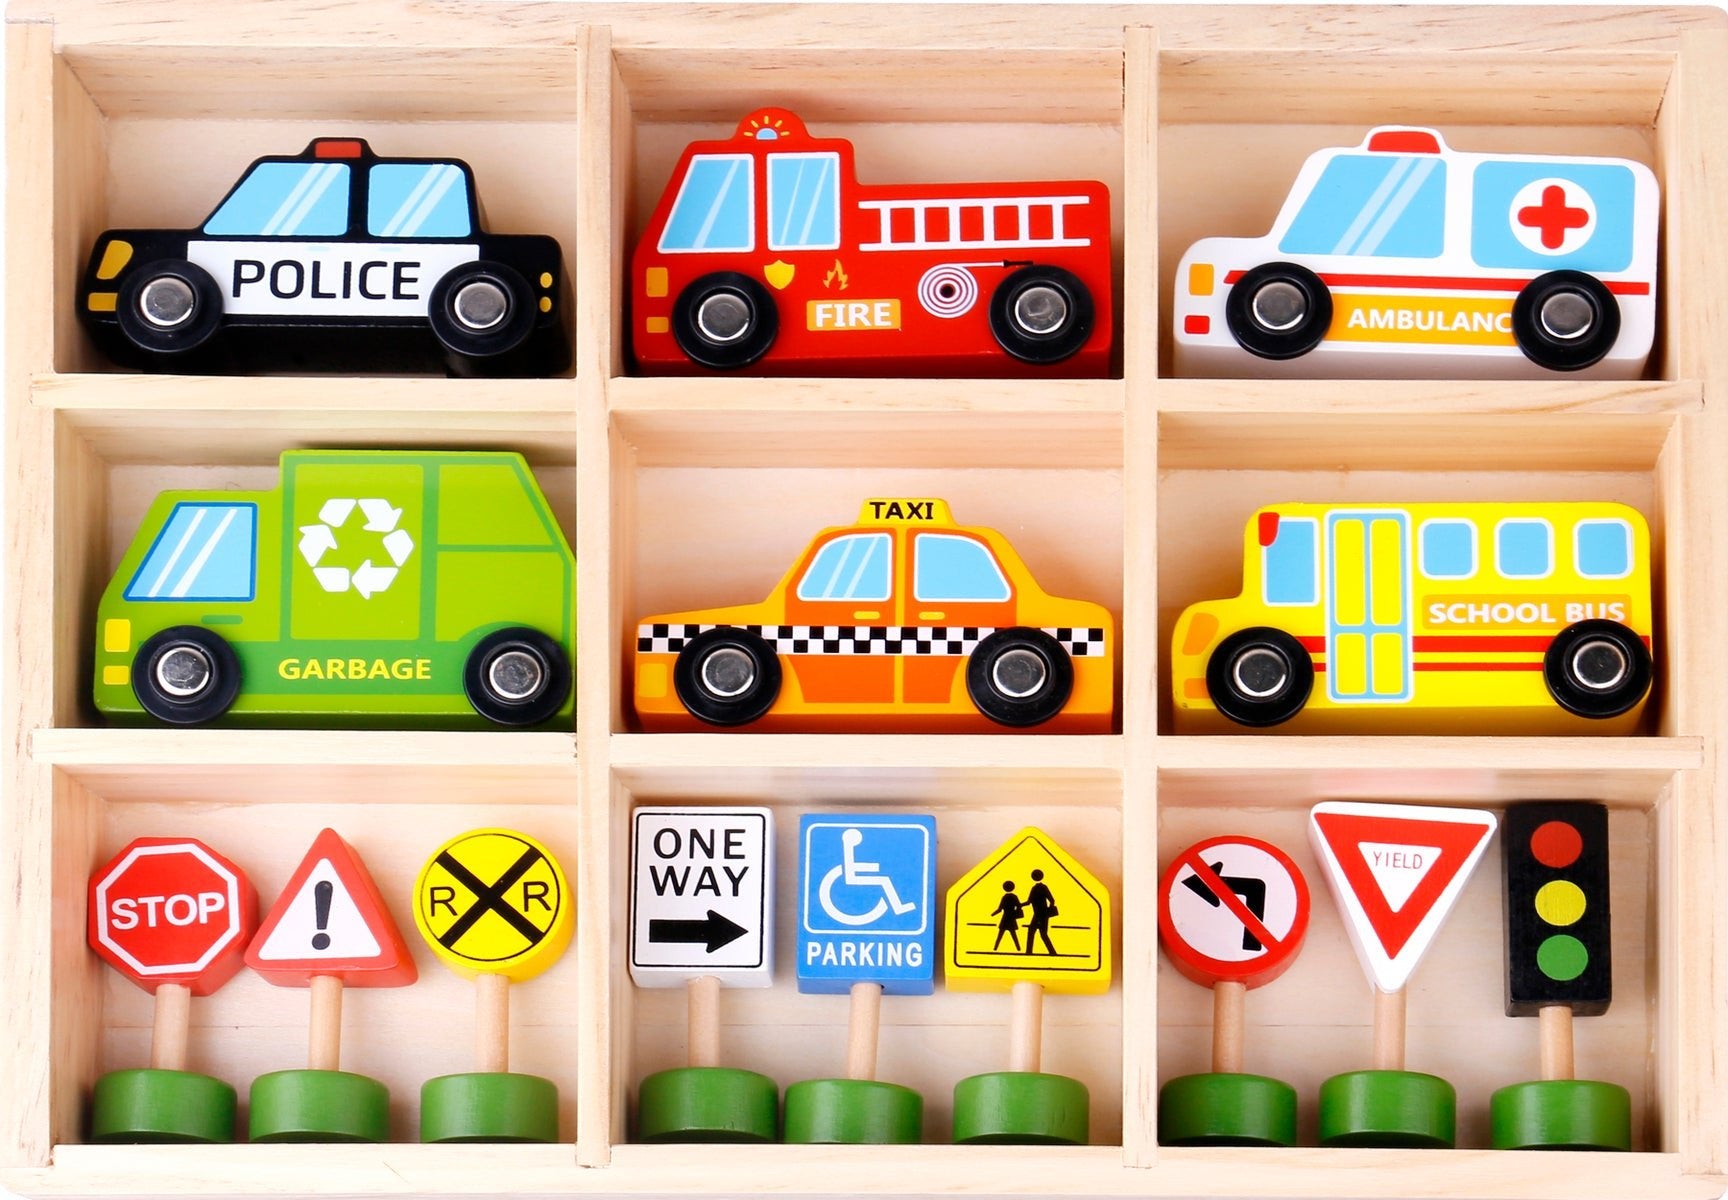 An assortment of wooden toy vehicles with accompanying road signs